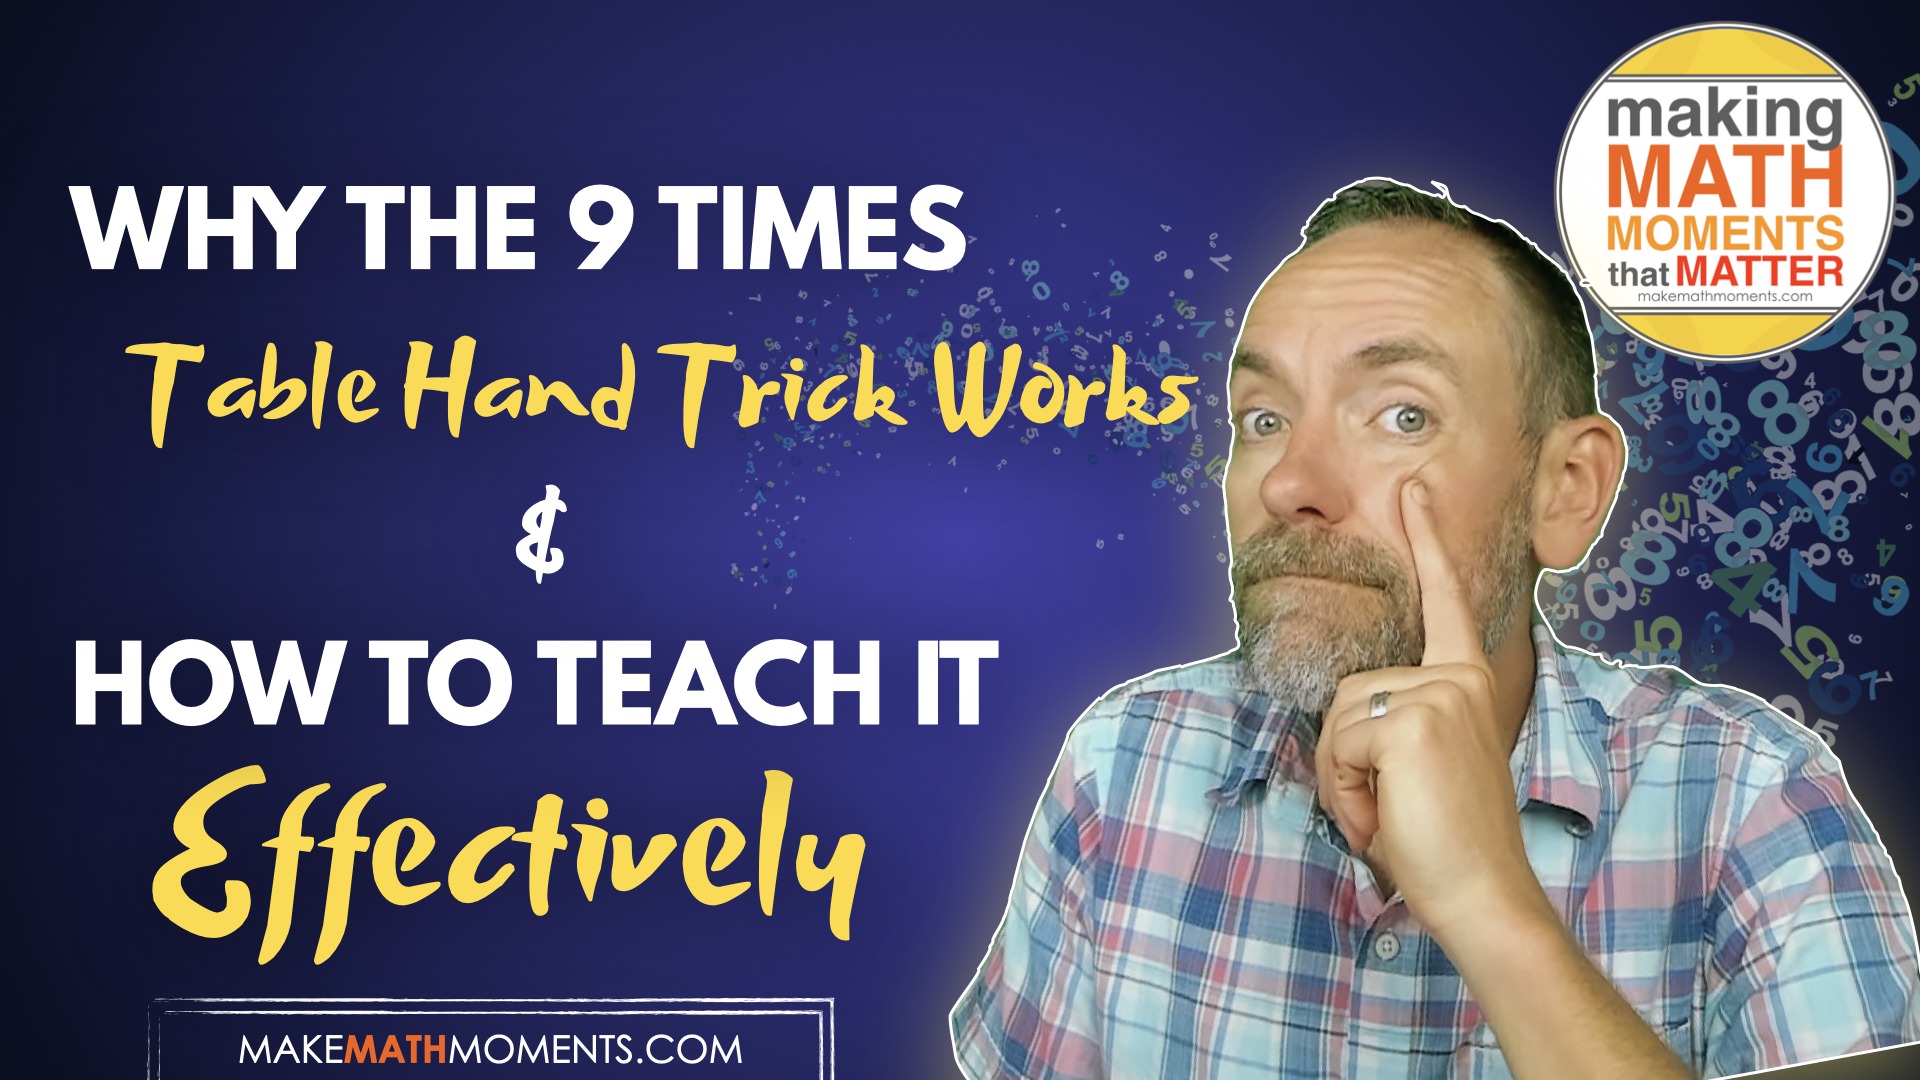 Why the 9 Times Table Hand Trick Works and How to Teach It Effectively